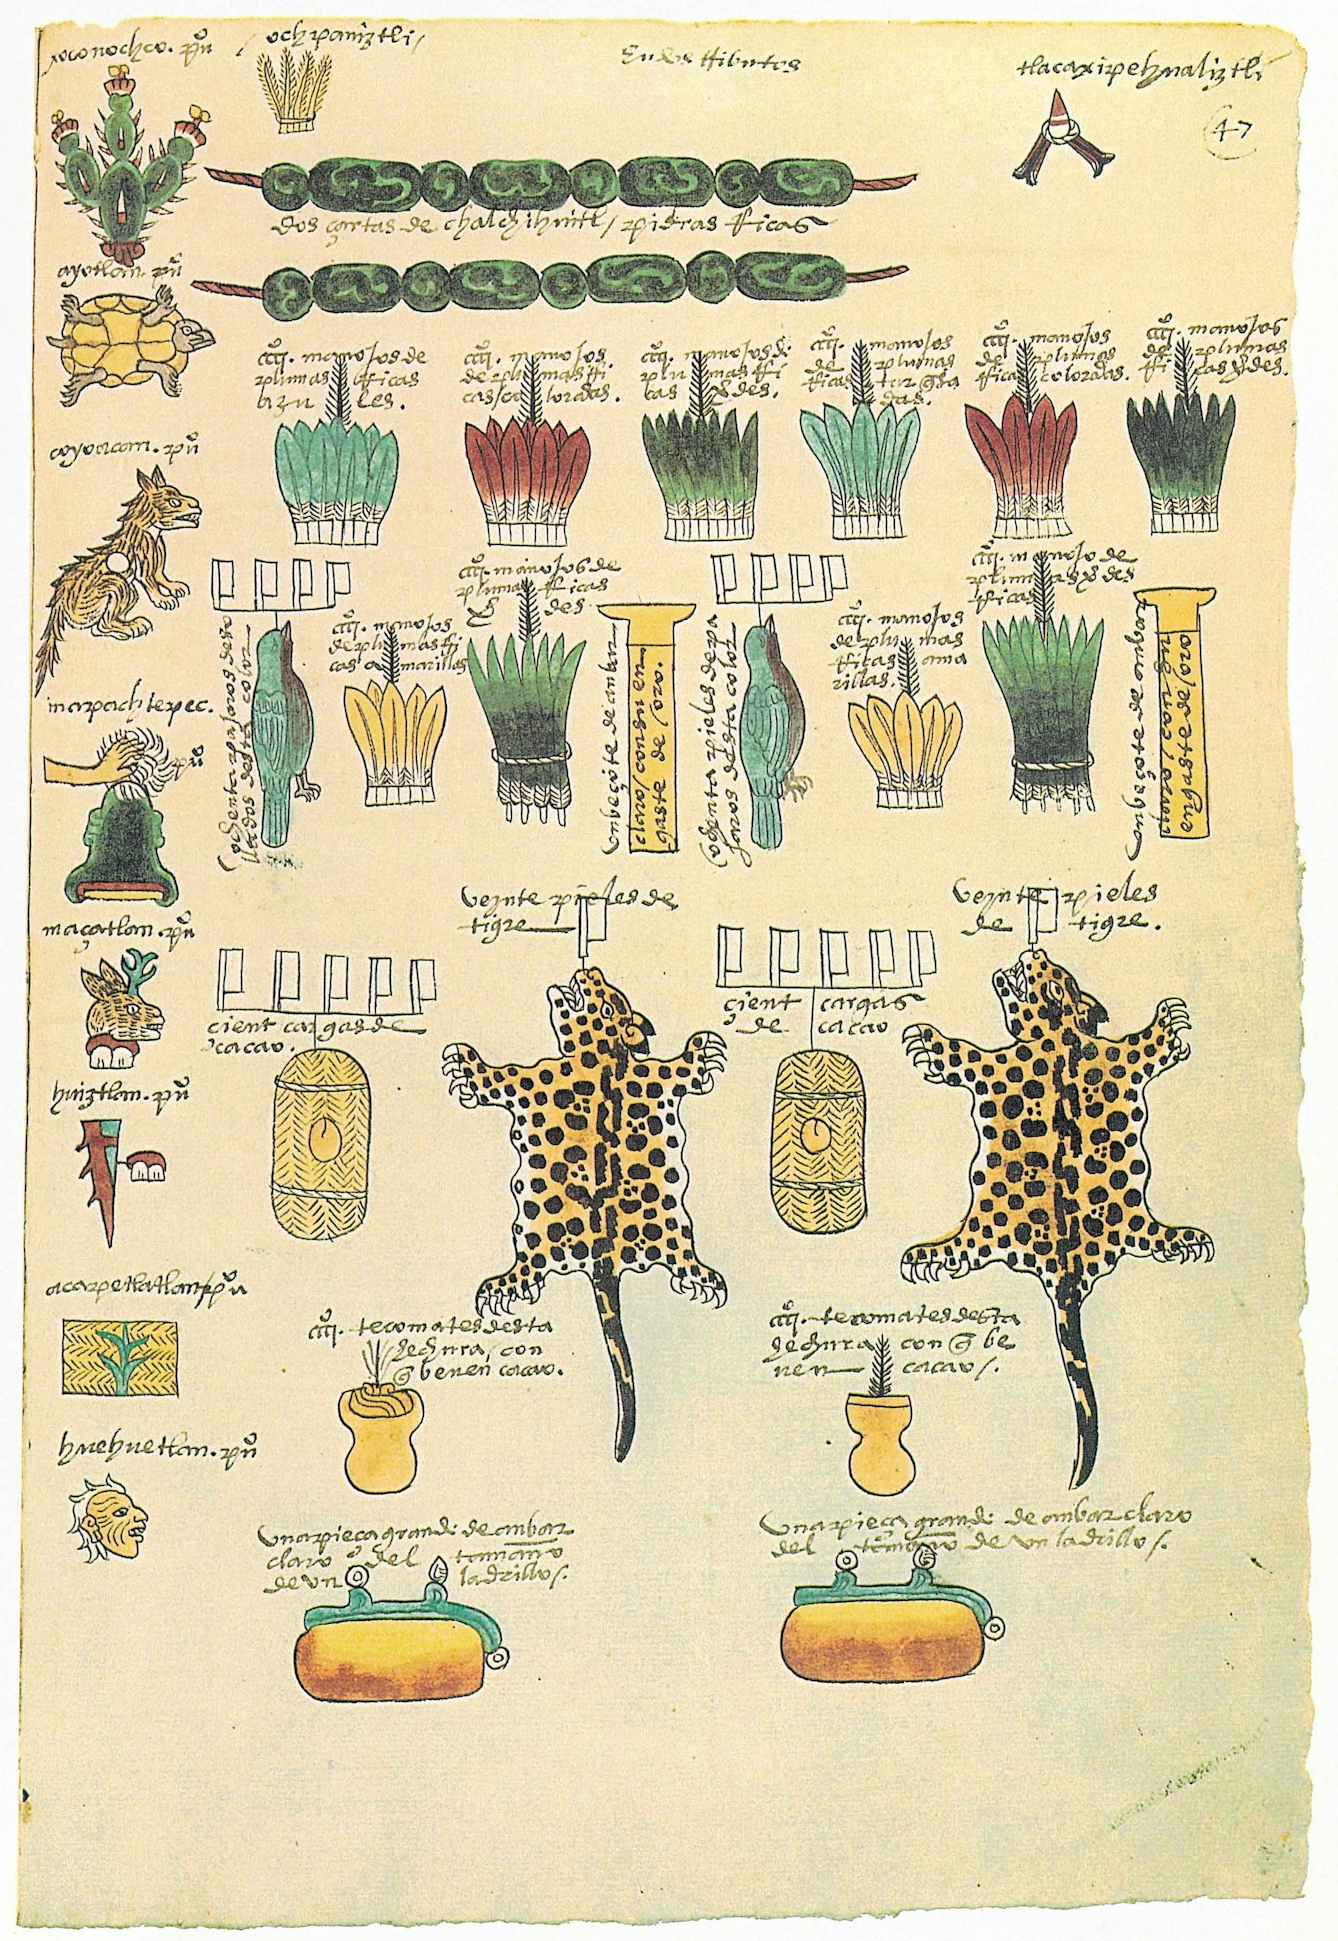 Colour image from the Codex Mendoza showing tribute to be paid. Beside two jaguar skins are two loads of cocoa with symbols illustrating that 200 loads of cocoa were required.